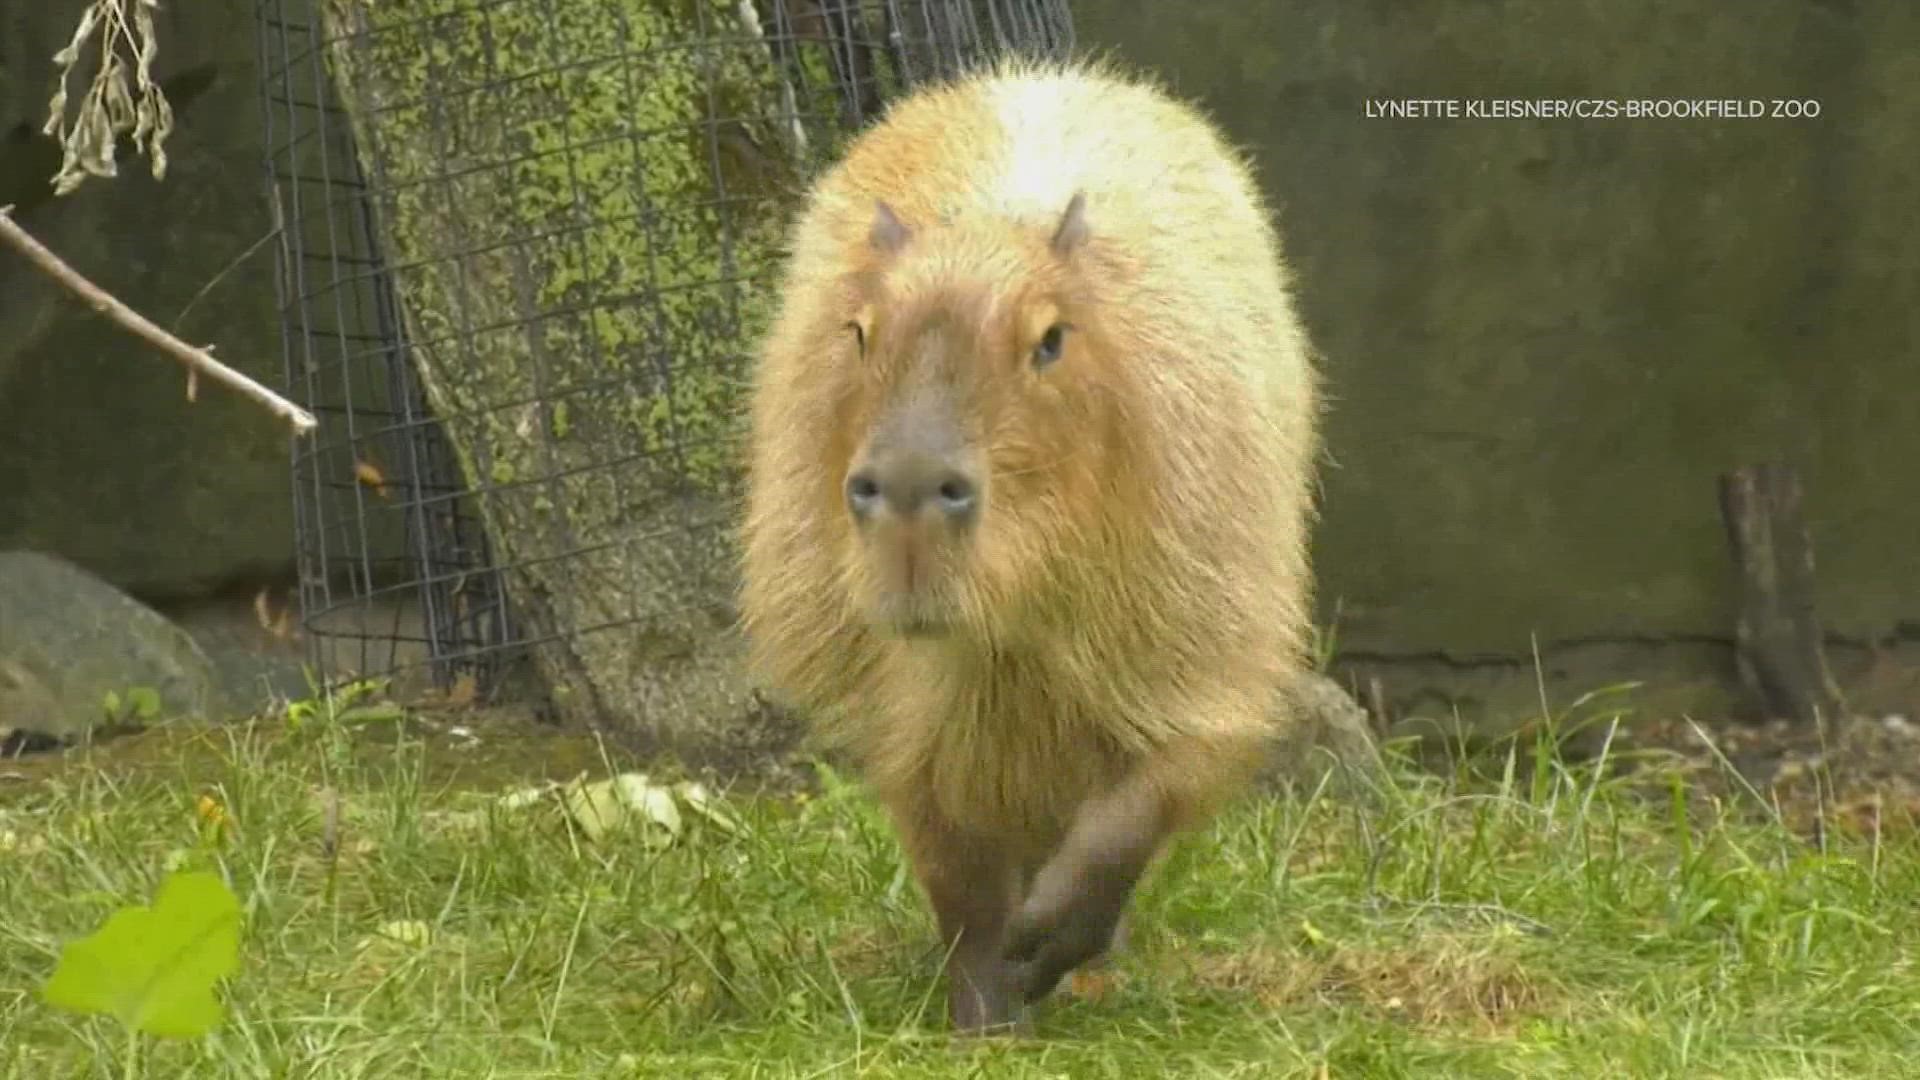 These capybaras are providing our Moment of Zen